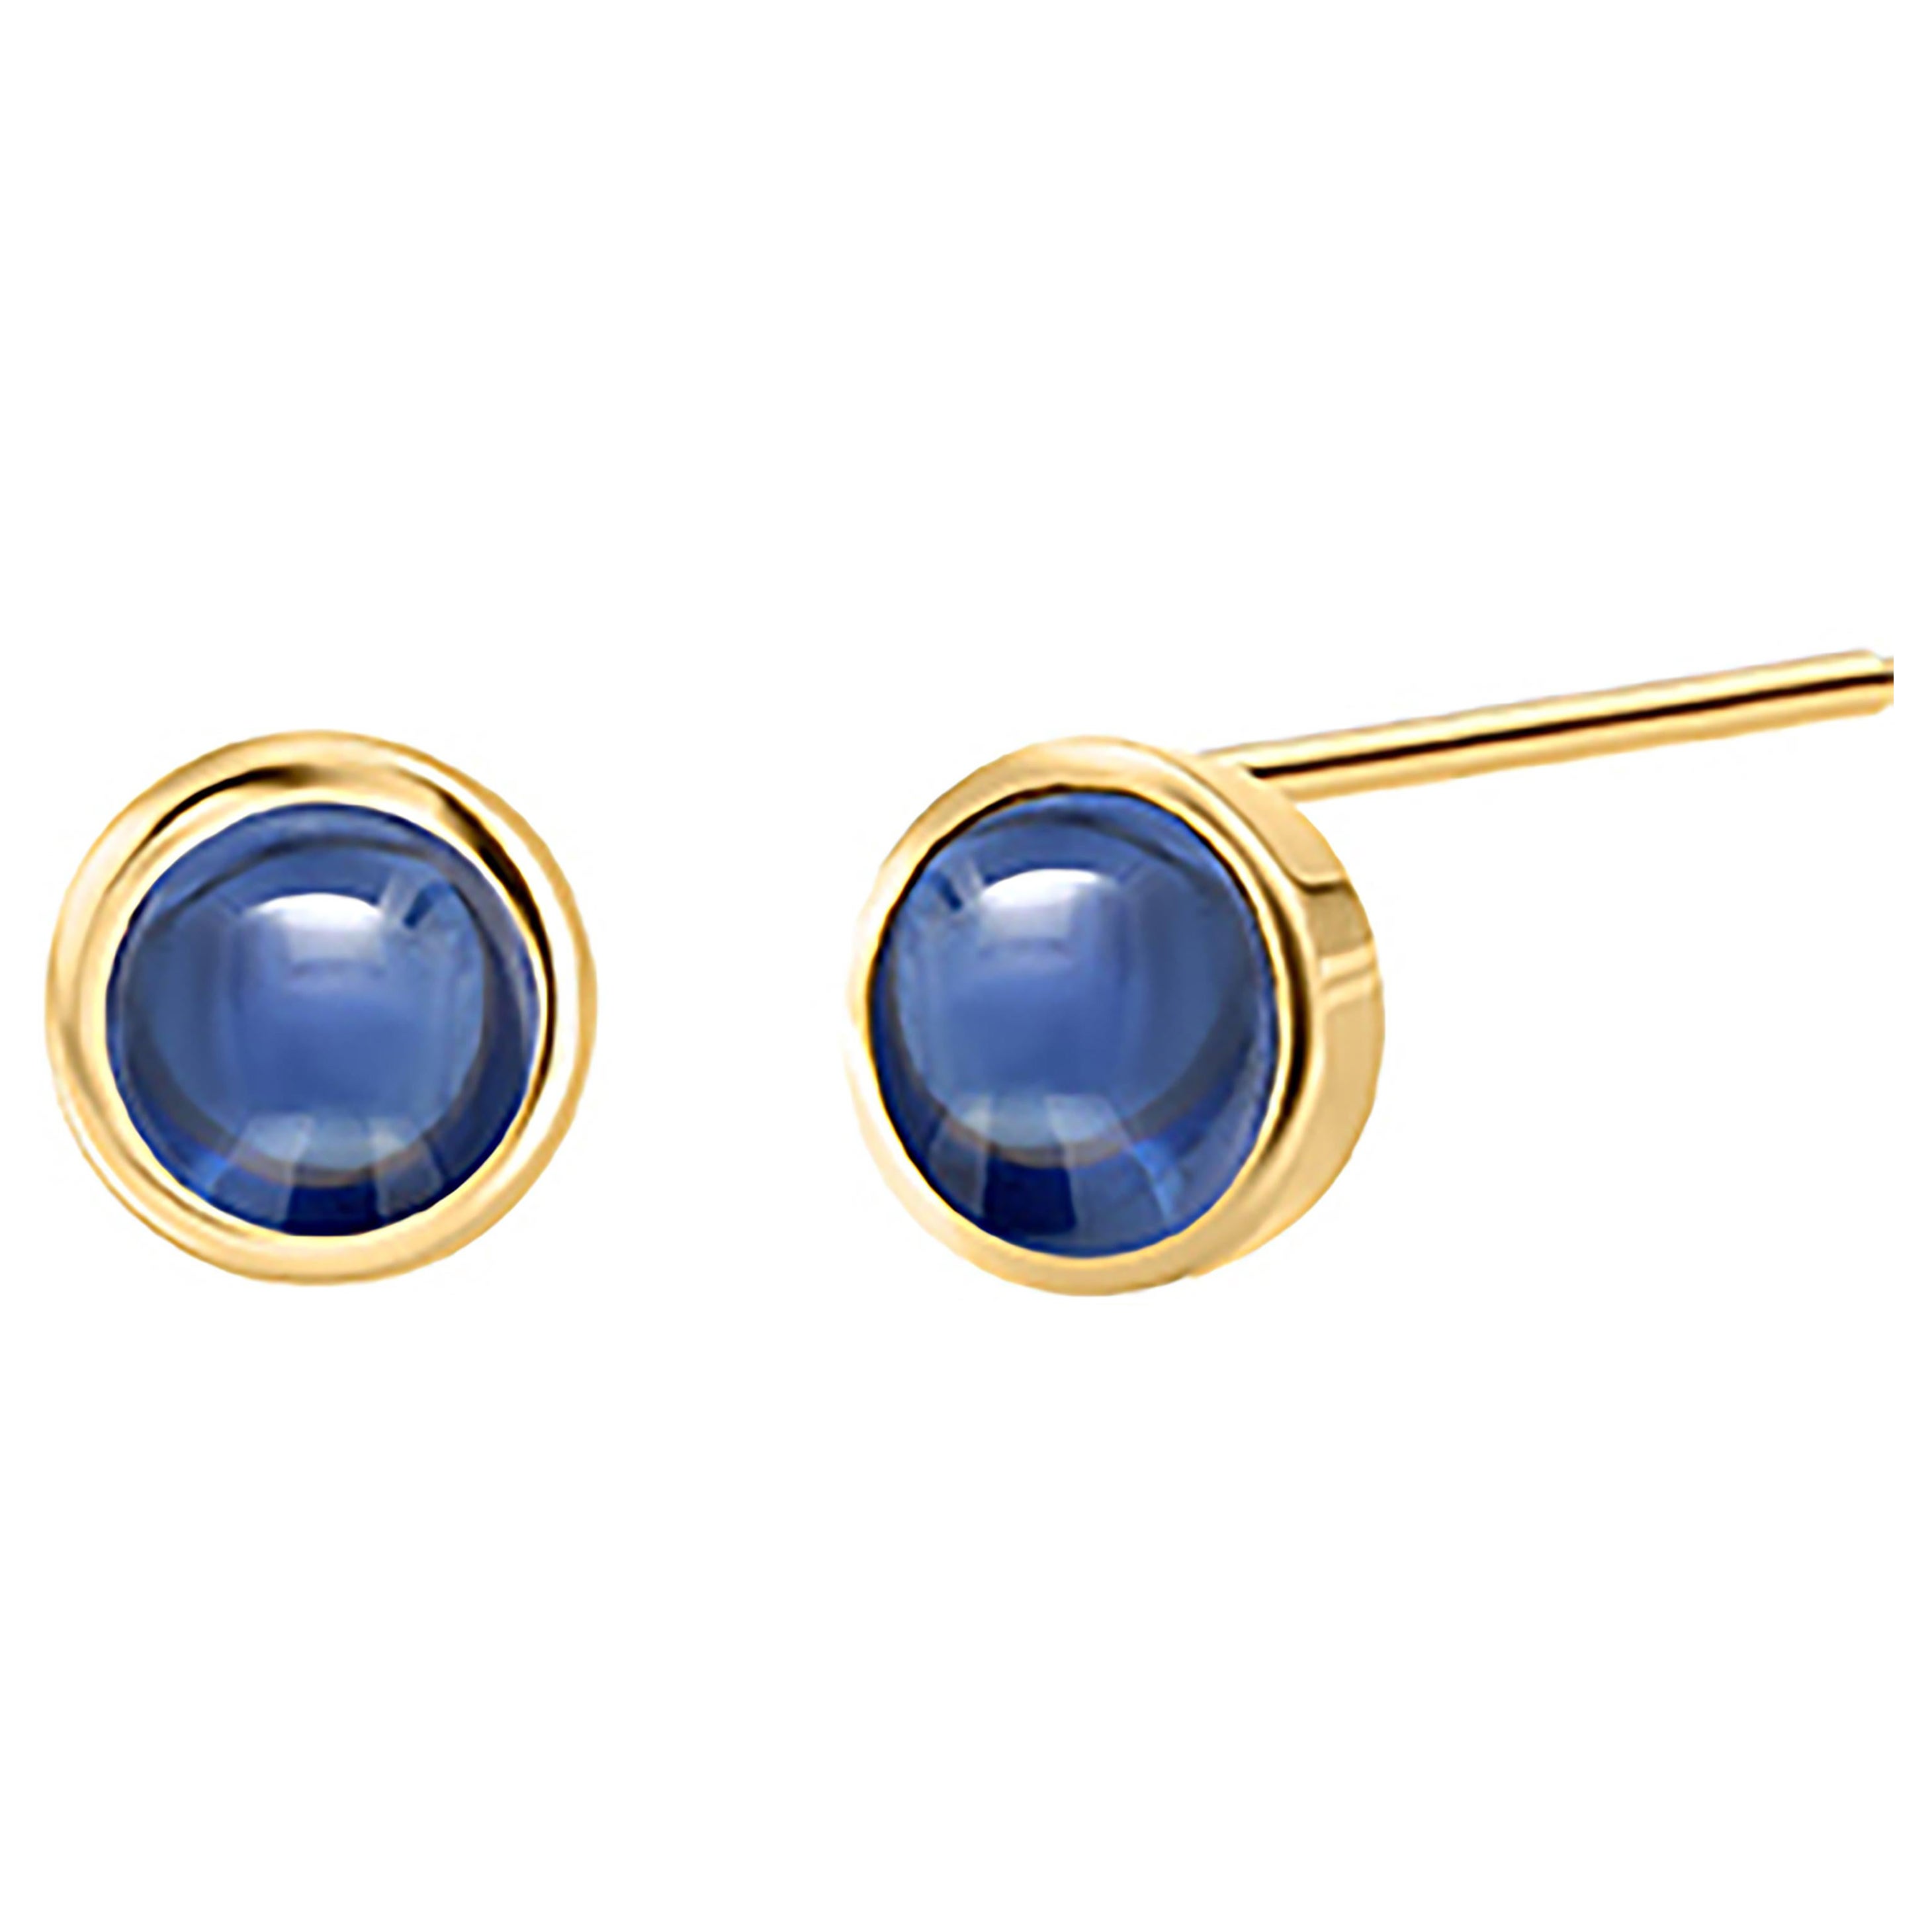 Matched Cabochon Sapphires 1.45 Carat Bezel Set Yellow Gold 0.25 Inch Earrings For Sale